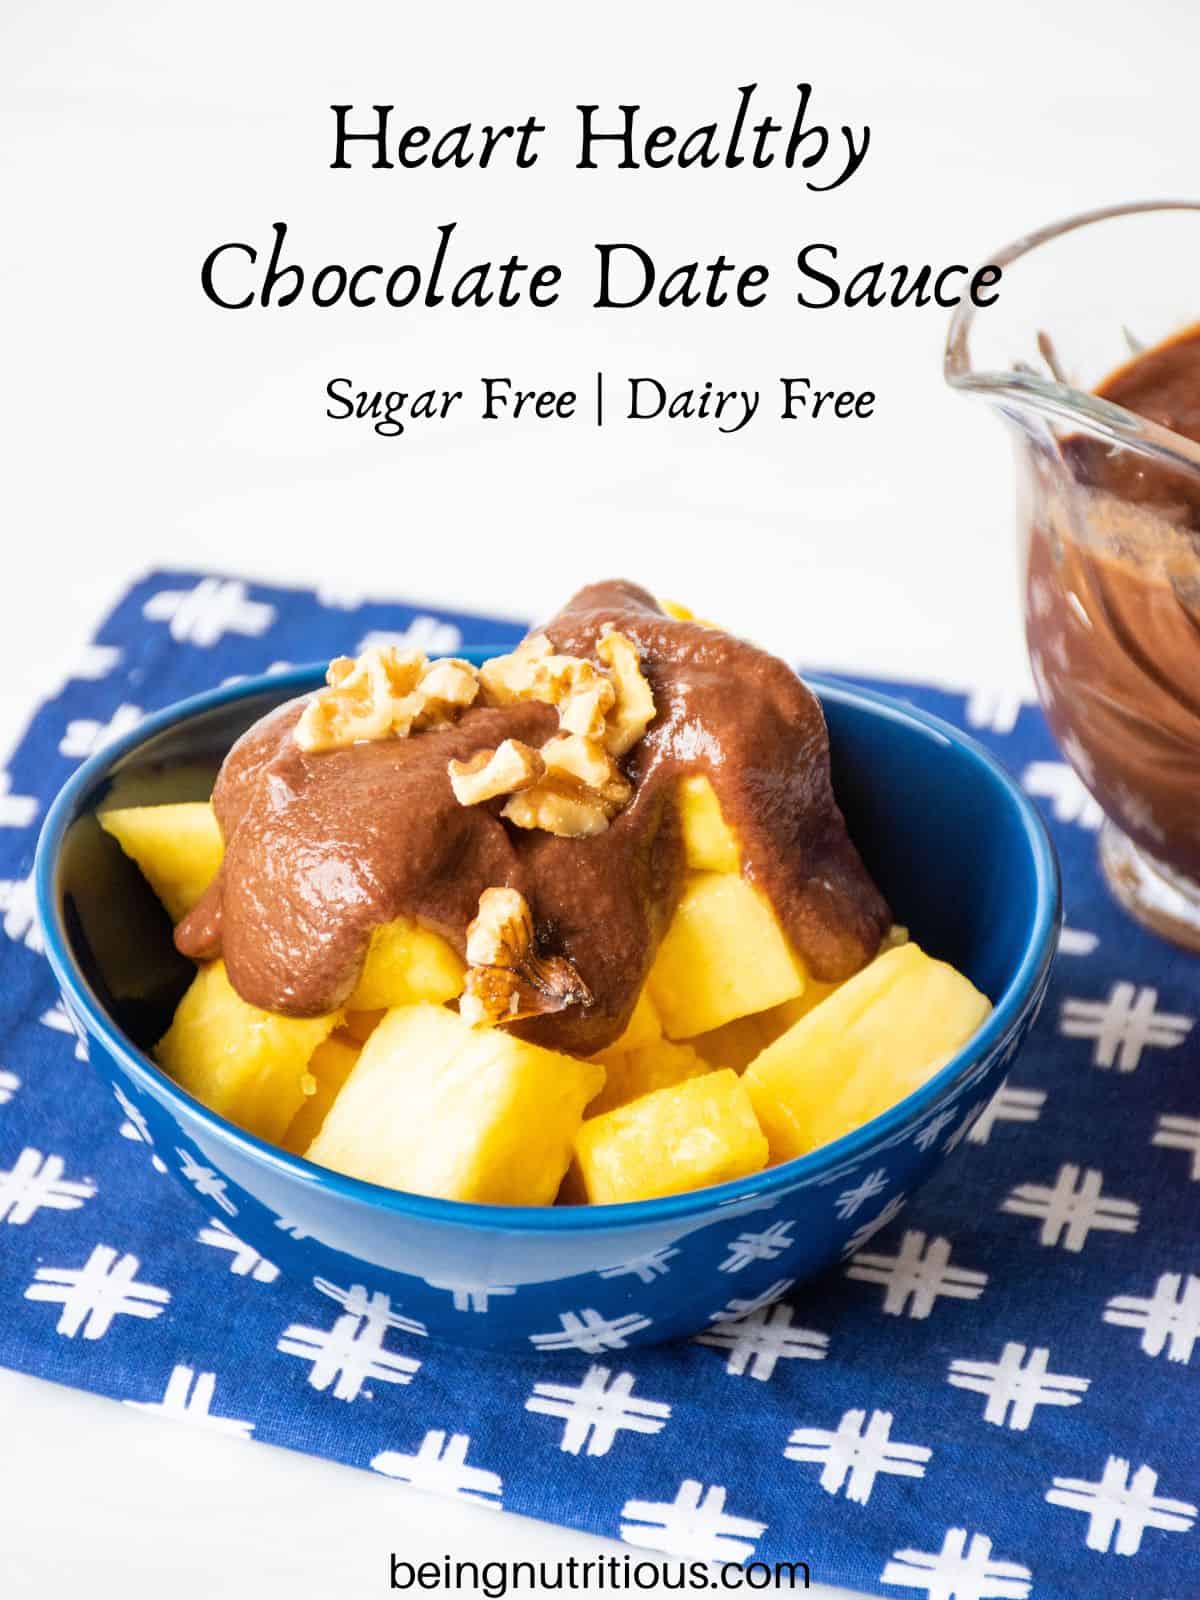 Bowl of pineapple covered with chocolate sauce and chopped walnuts. Text overlay: Heart Healthy Chocolate Date Sauce; sugar free, dairy free.